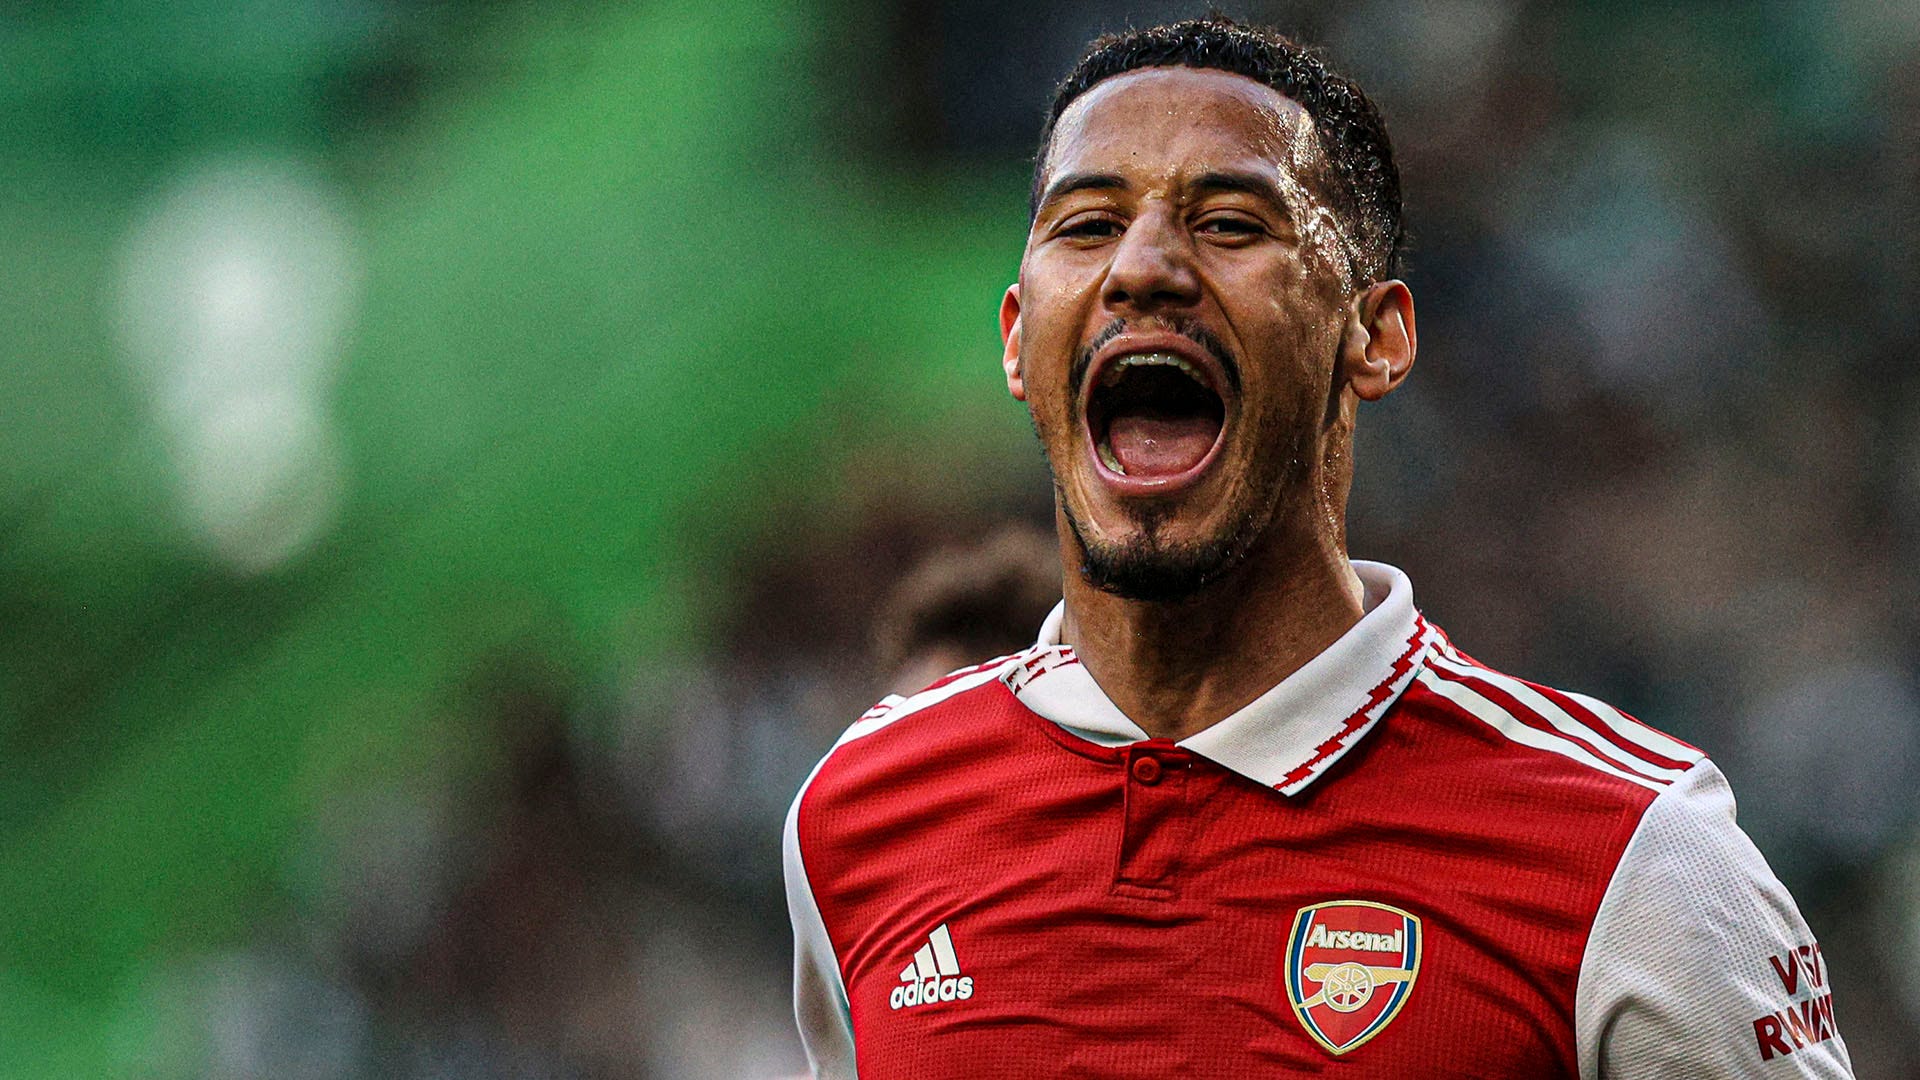 Arsenal defender William Saliba has proved to be a vital cog for the team since breaking into the first team during the 2022/23 season.